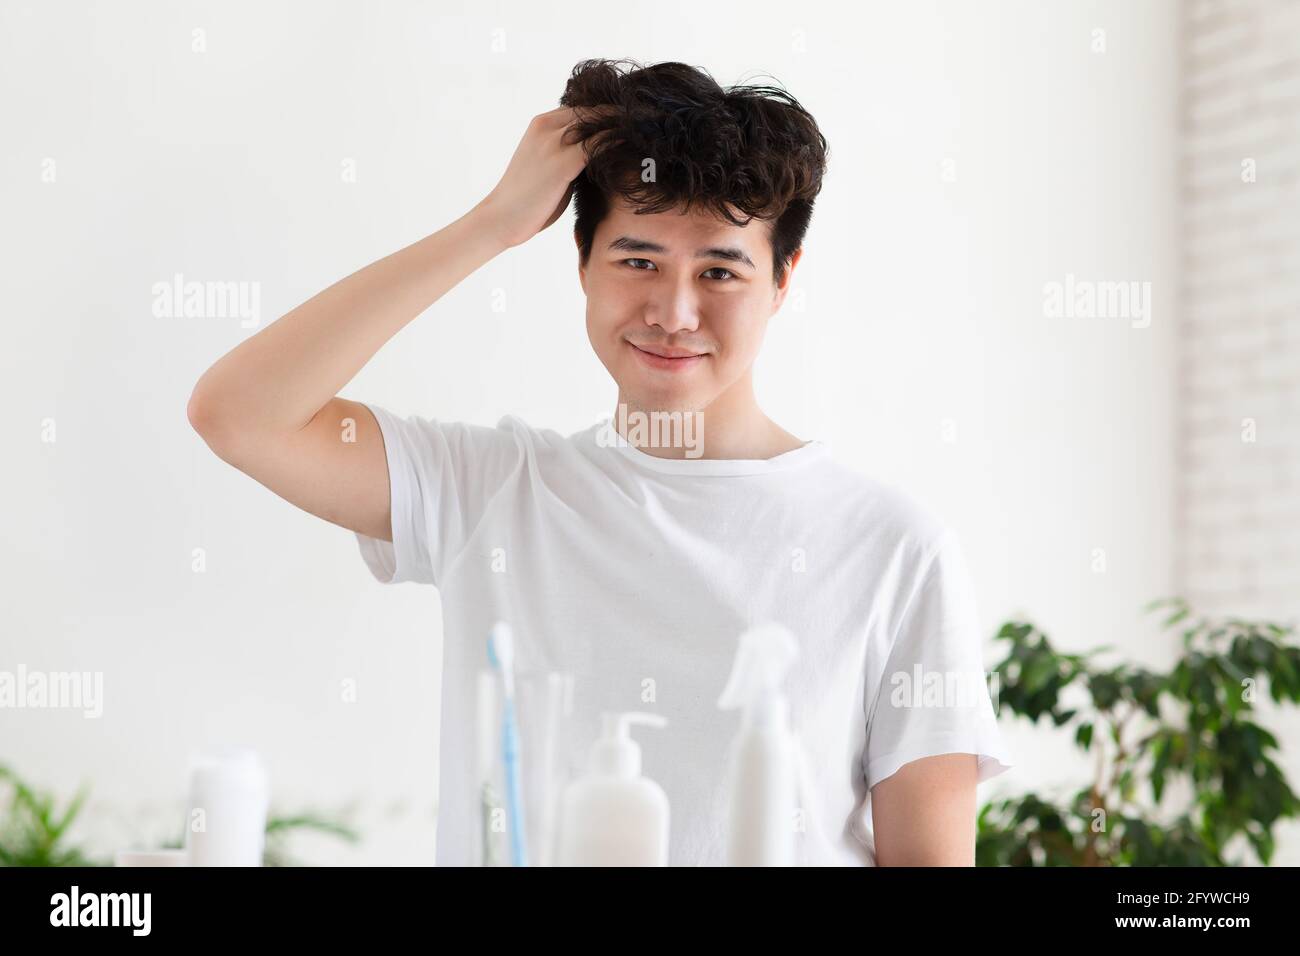 Hair care at home, daily procedure and morning hygiene at covid-19 self-isolation Stock Photo